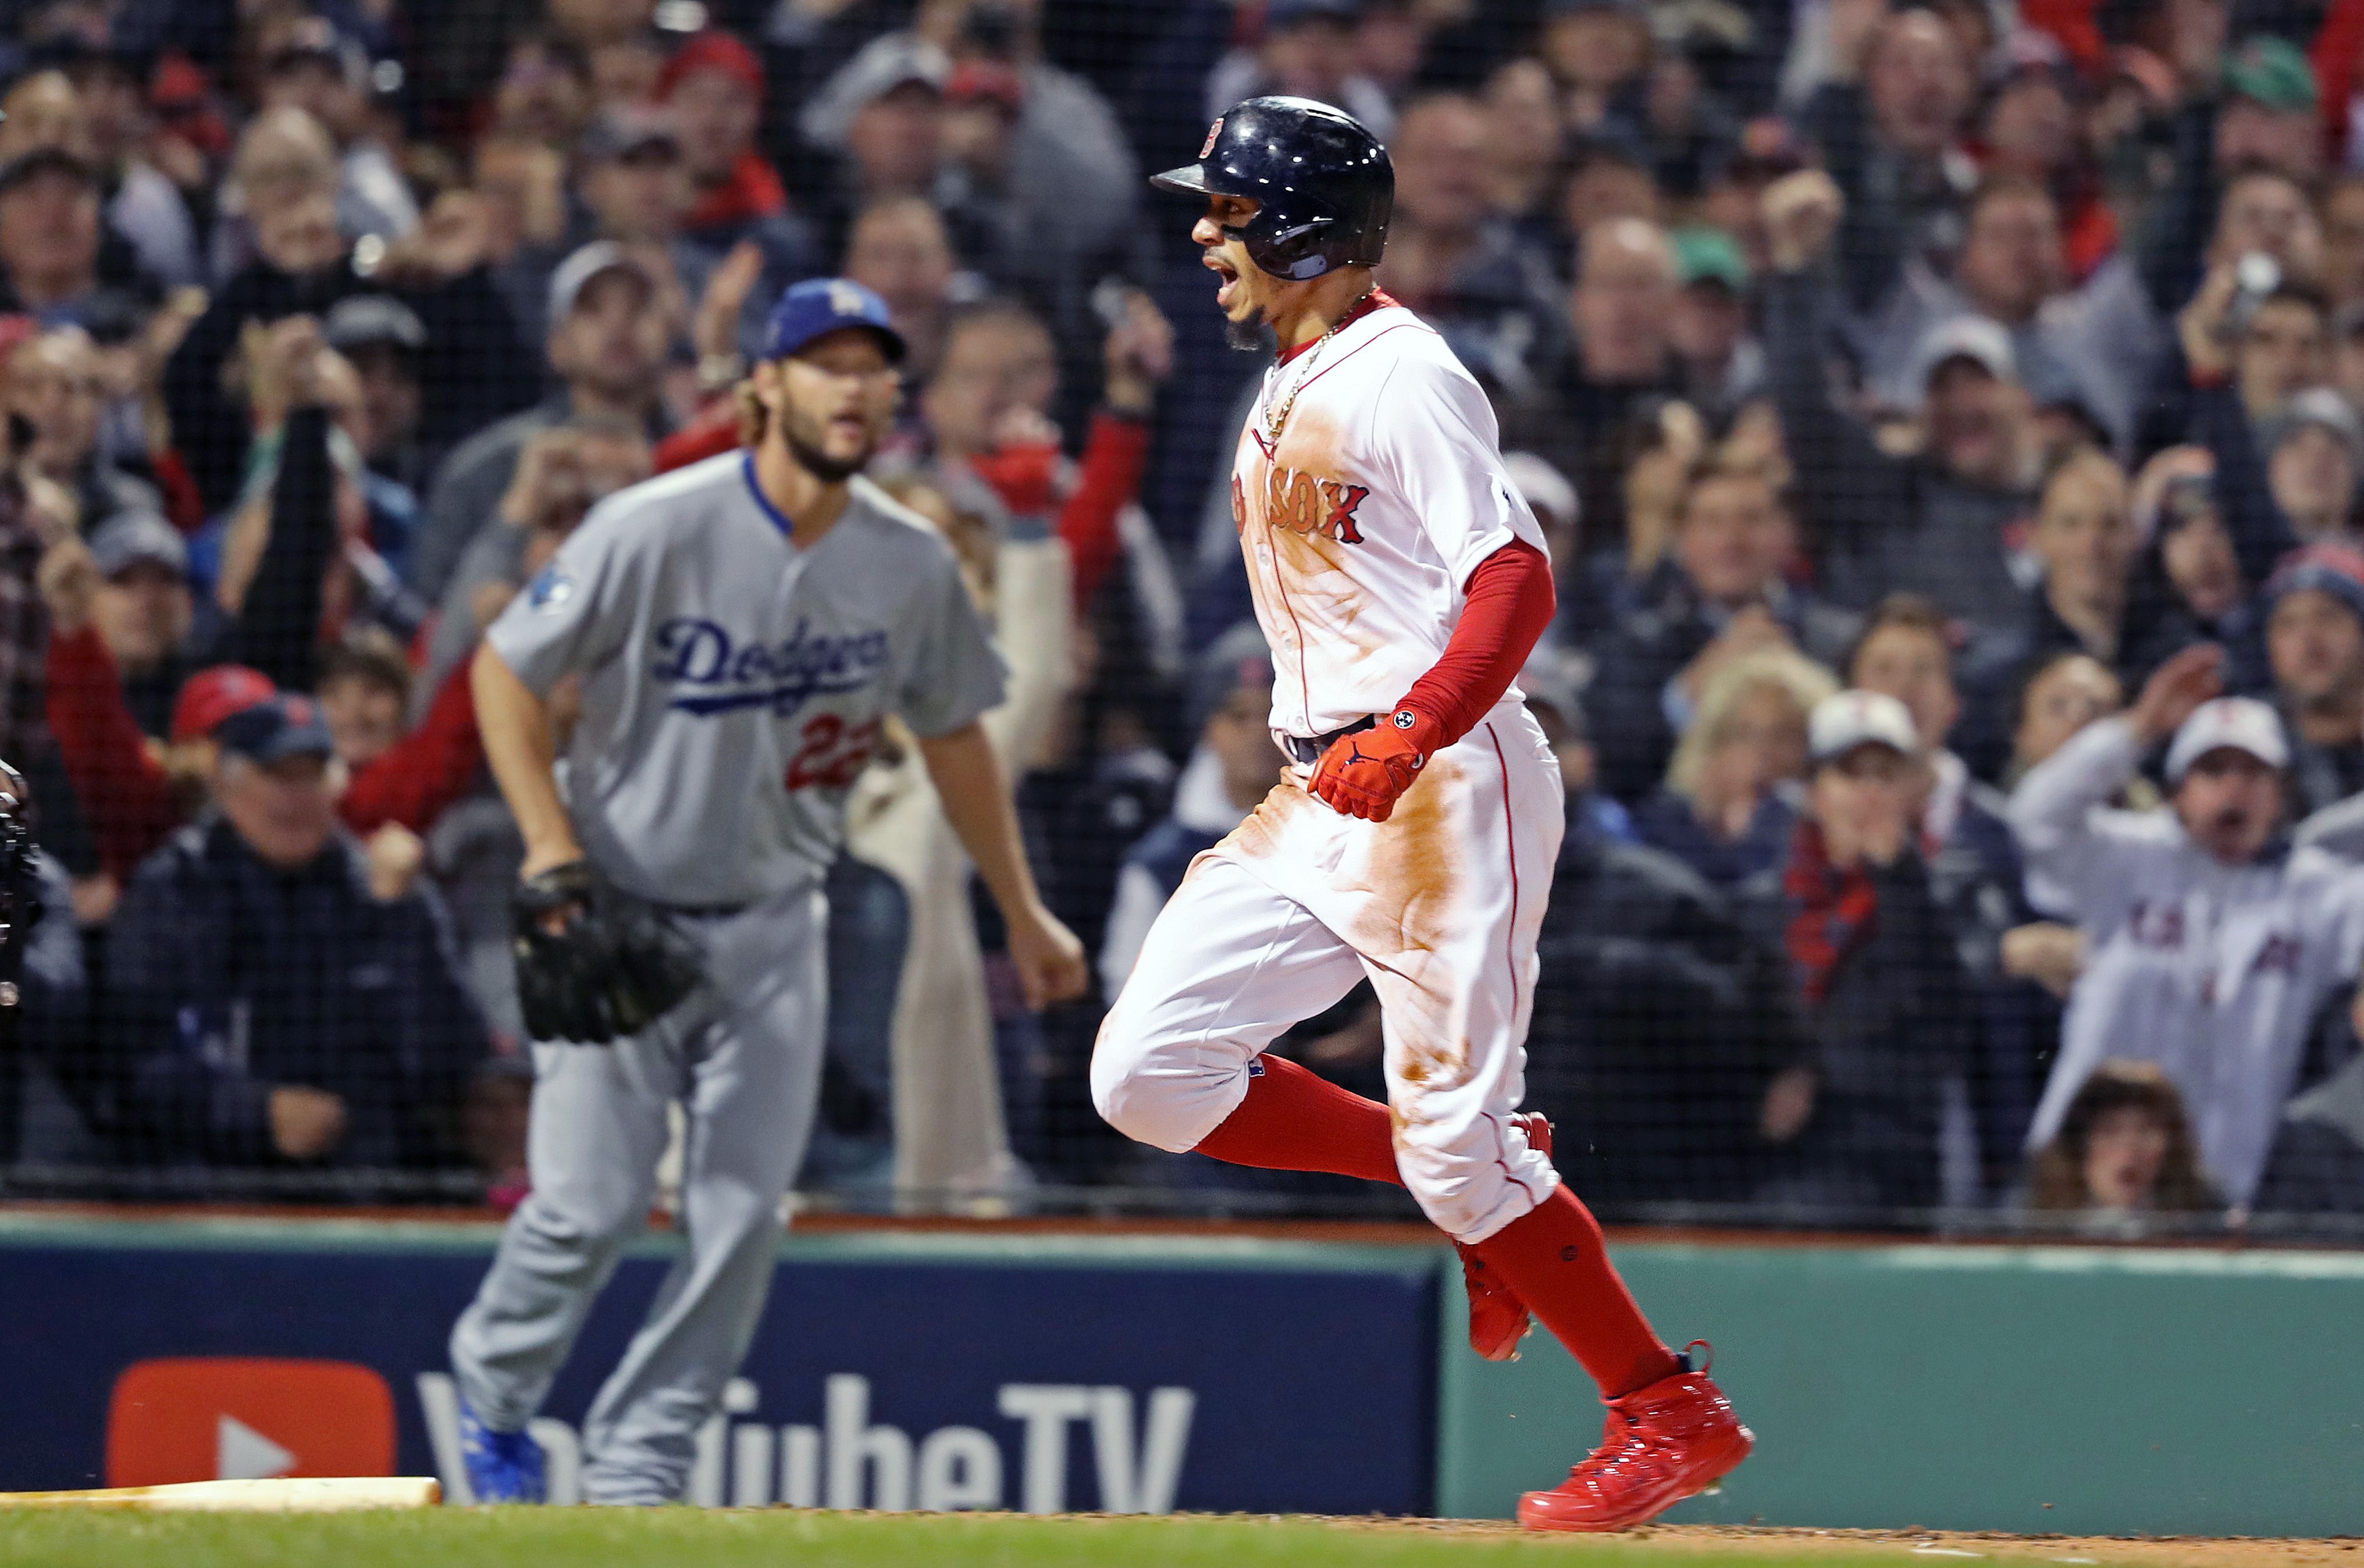 Dodgers could make Mookie Betts the face of the franchise - The Boston Globe